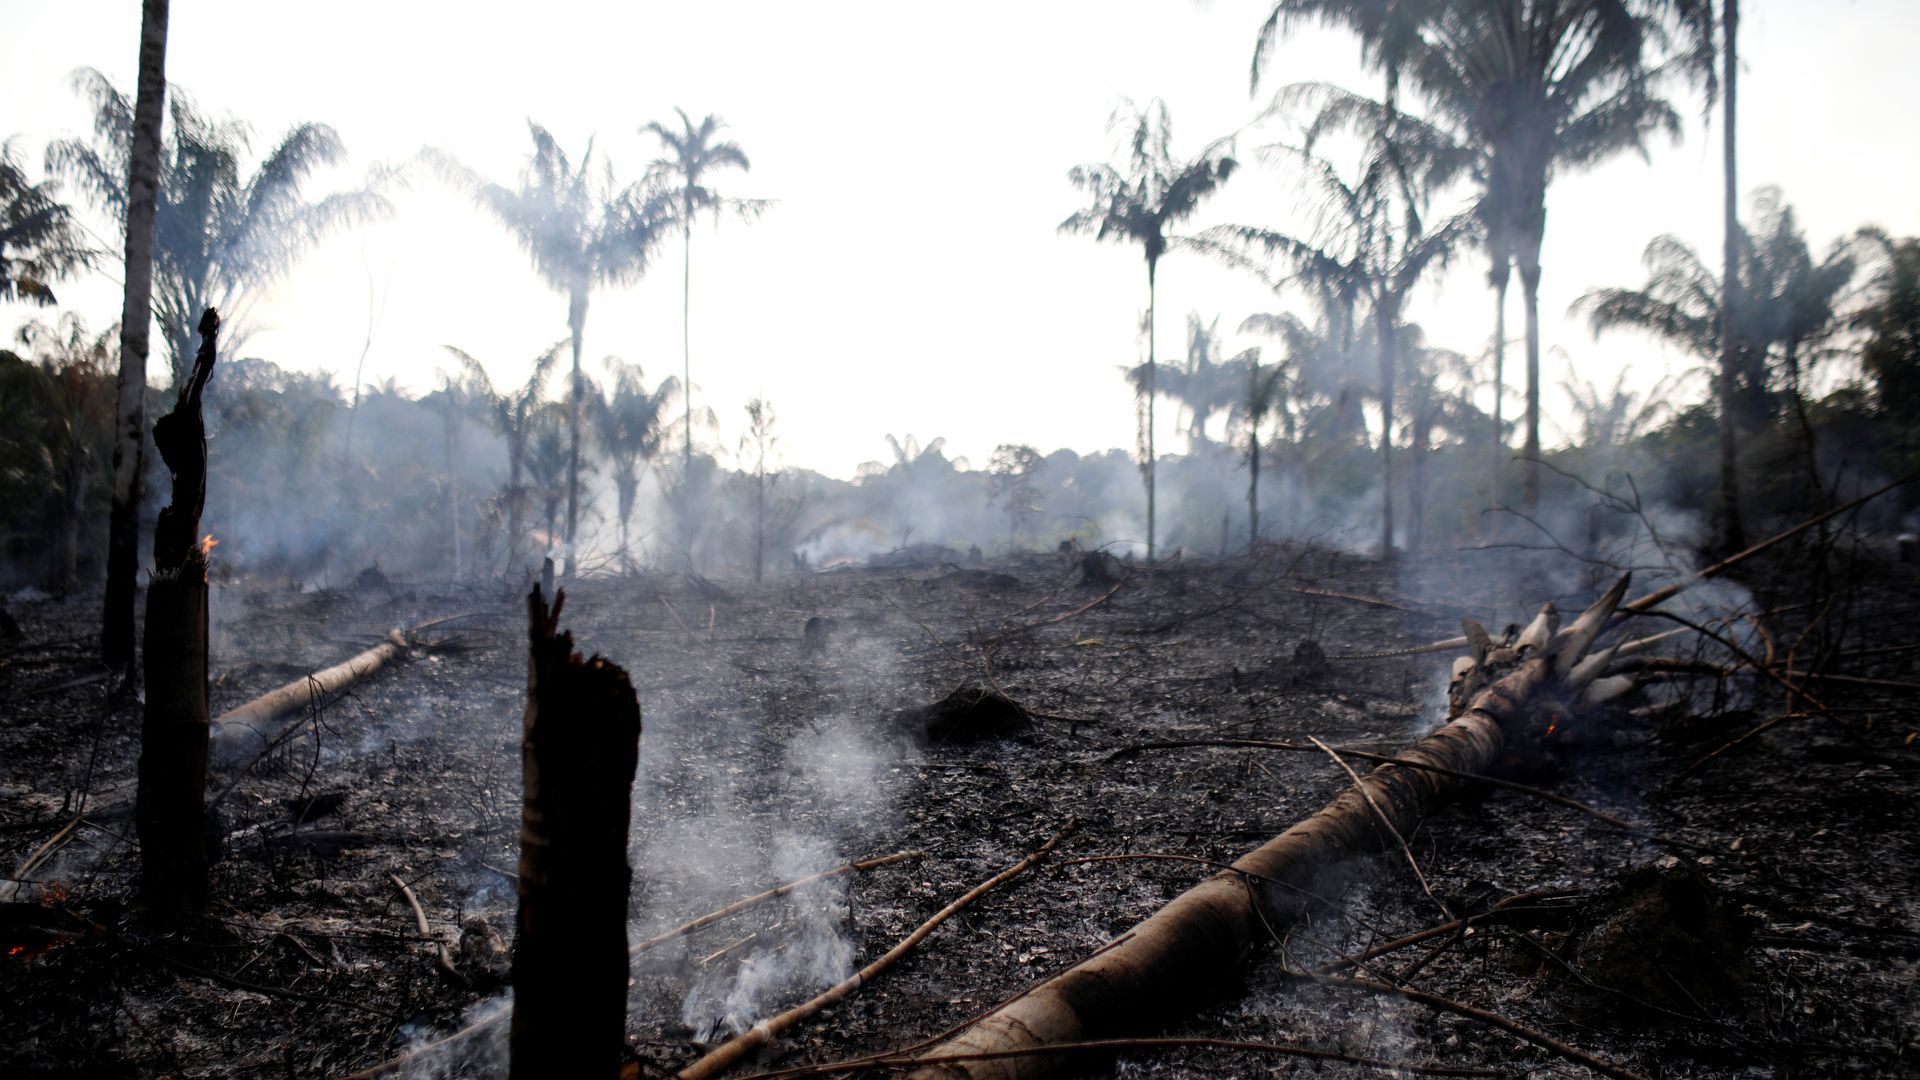 A charred trunk is seen on a tract of Amazon jungle that was recently burned by loggers and farmers in Brazil.